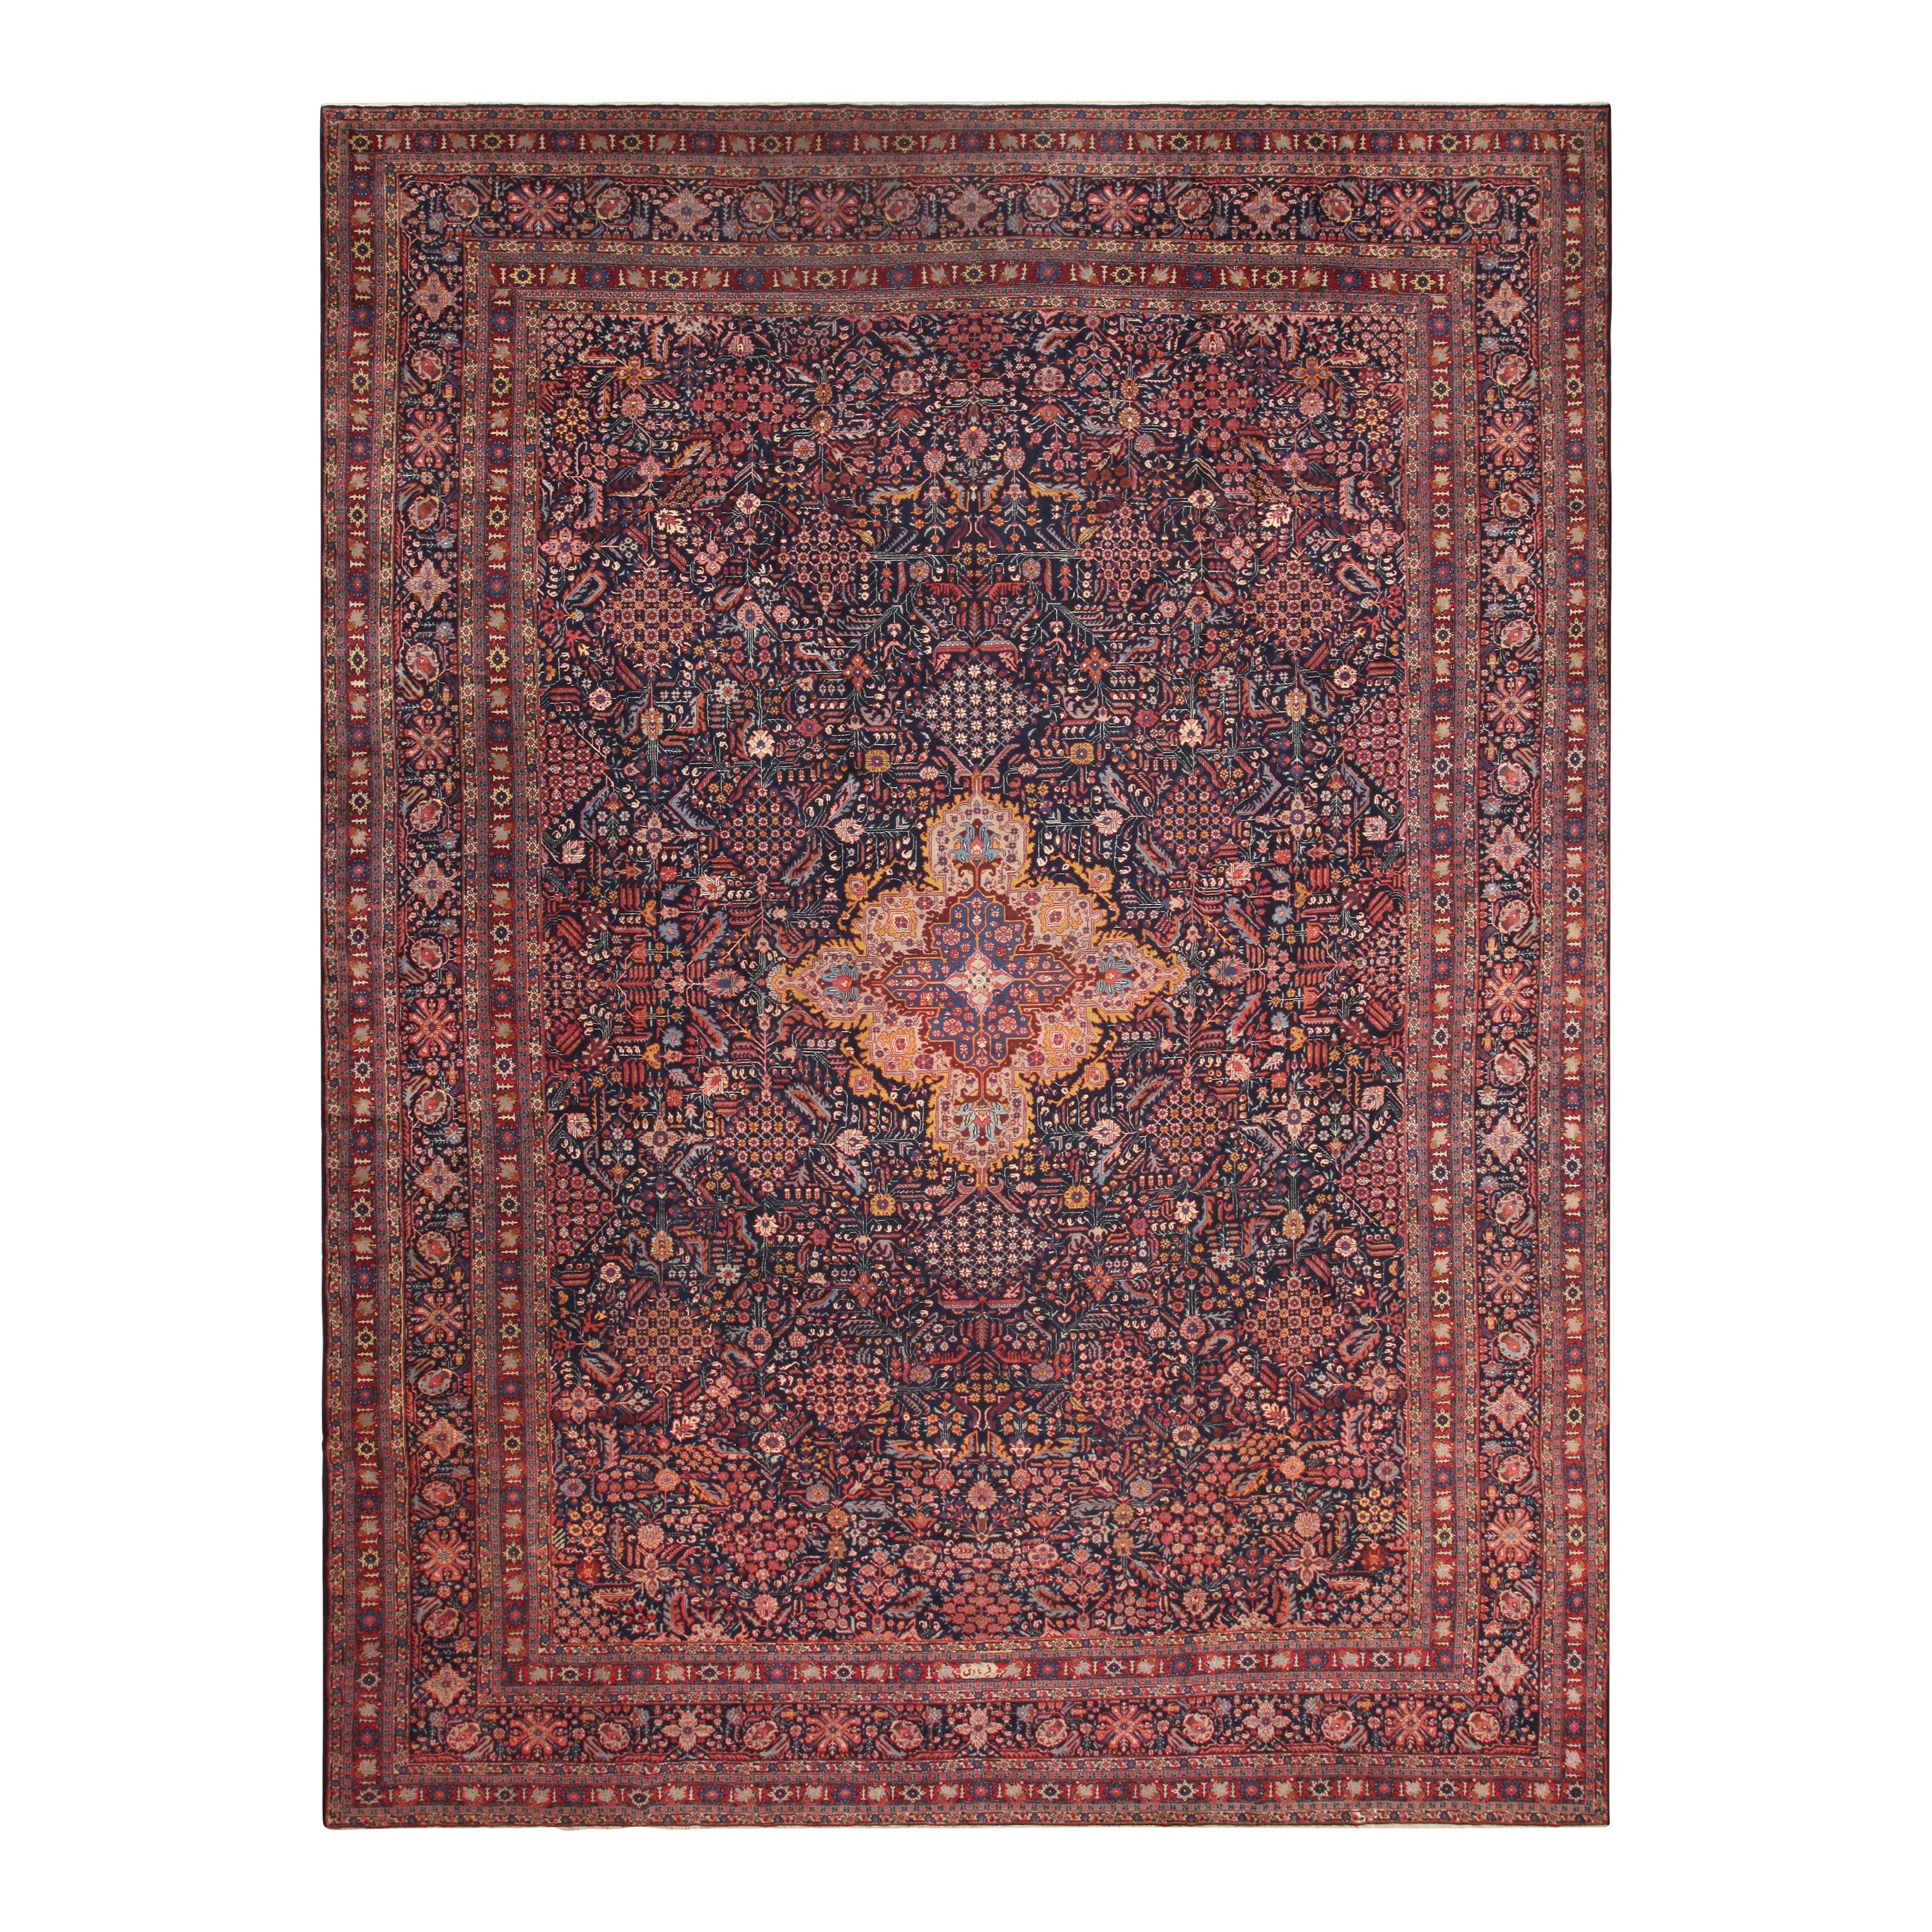 Large Antique Persian Senneh Area Rug. 13 ft x 17 ft 8 in